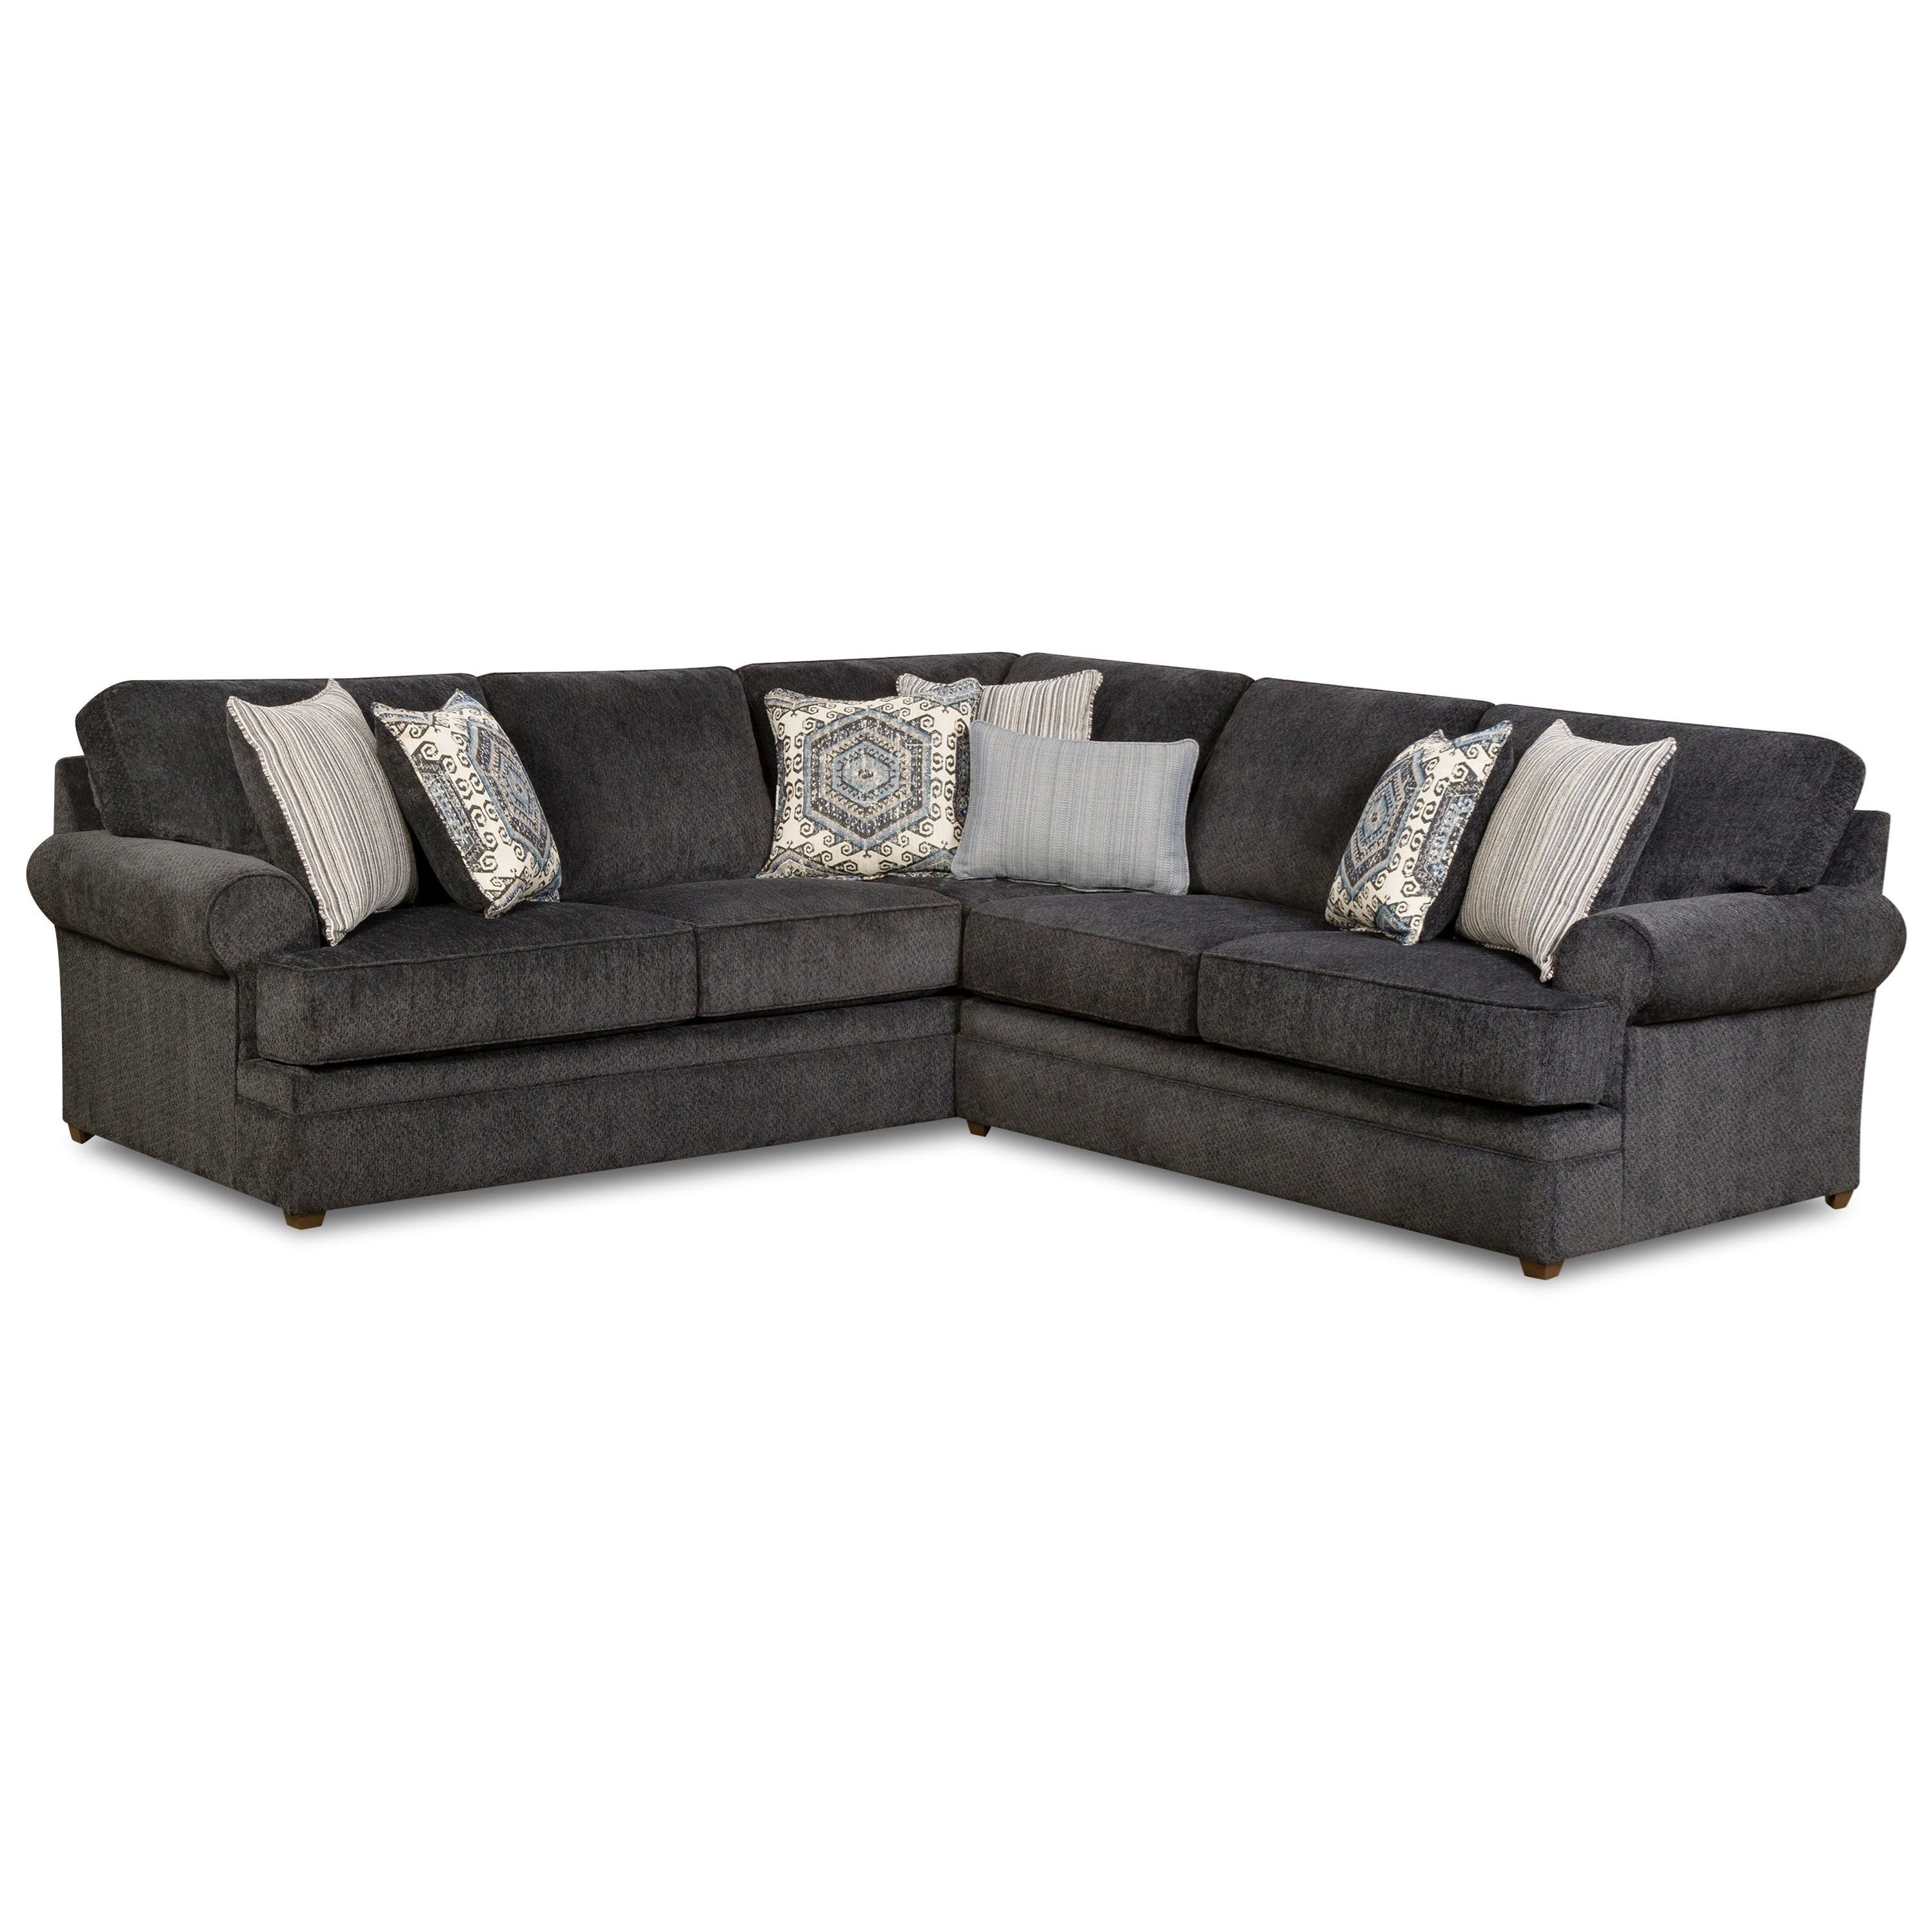 Simmons Upholstery 8530 Br Transitional Sectional Sofa With Rolled With Simmons Chaise Sofas (View 5 of 10)